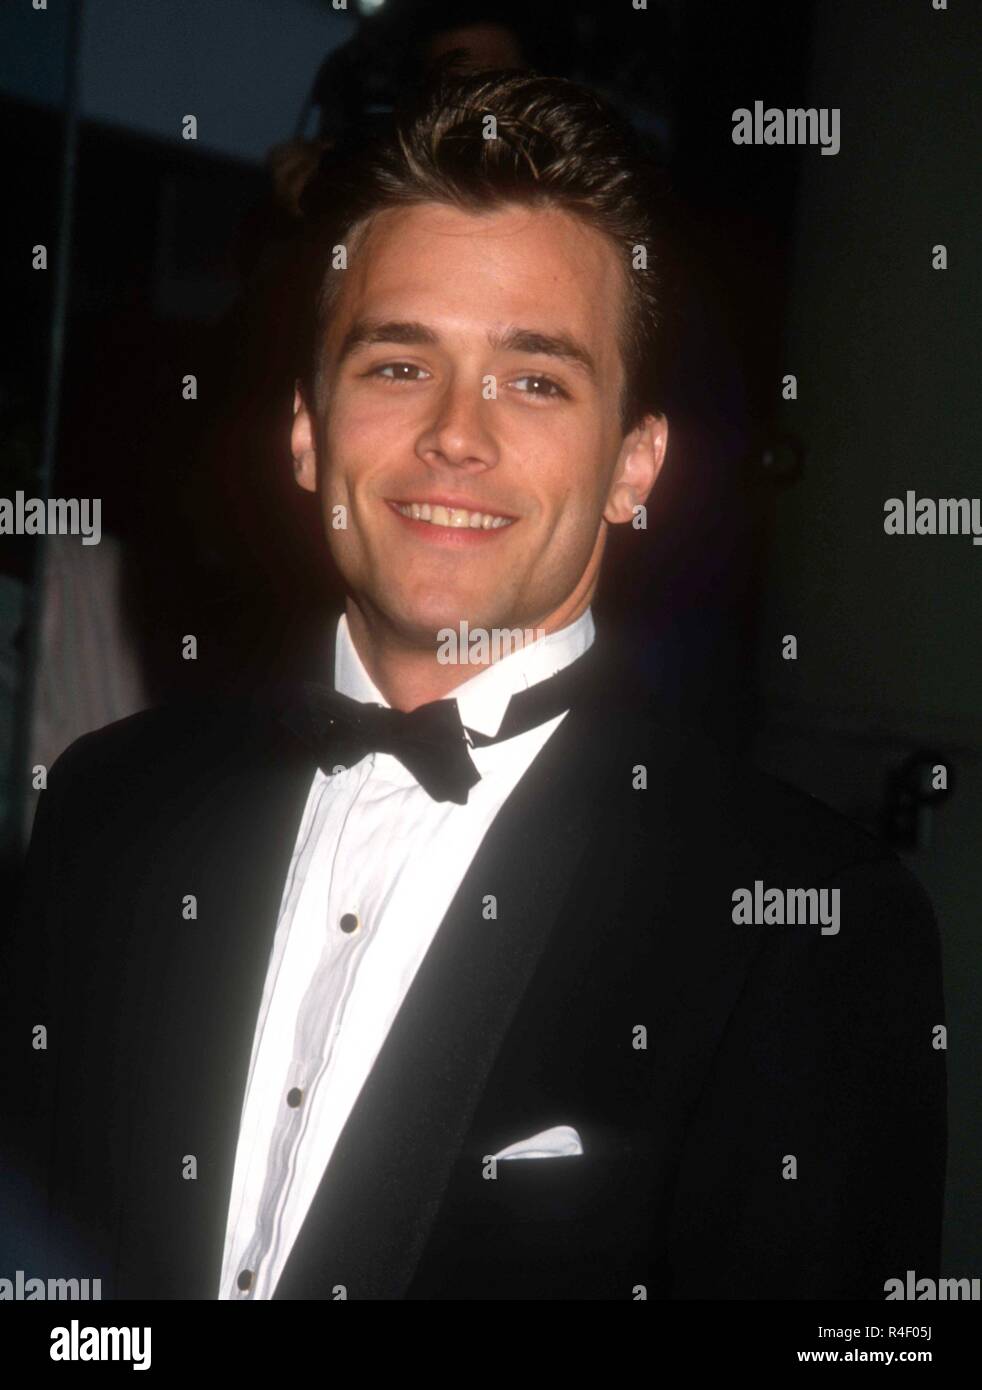 BEVERLY HILLS, CA - FEBRUARY 26: Actor Scott Reeves attends the Ninth Annual Soap Opera Digest Awards on February 26, 1993 at the Beverly Hilton Hotel in Beverly Hills, California. Photo by Barry King/Alamy Stock Photo Stock Photo